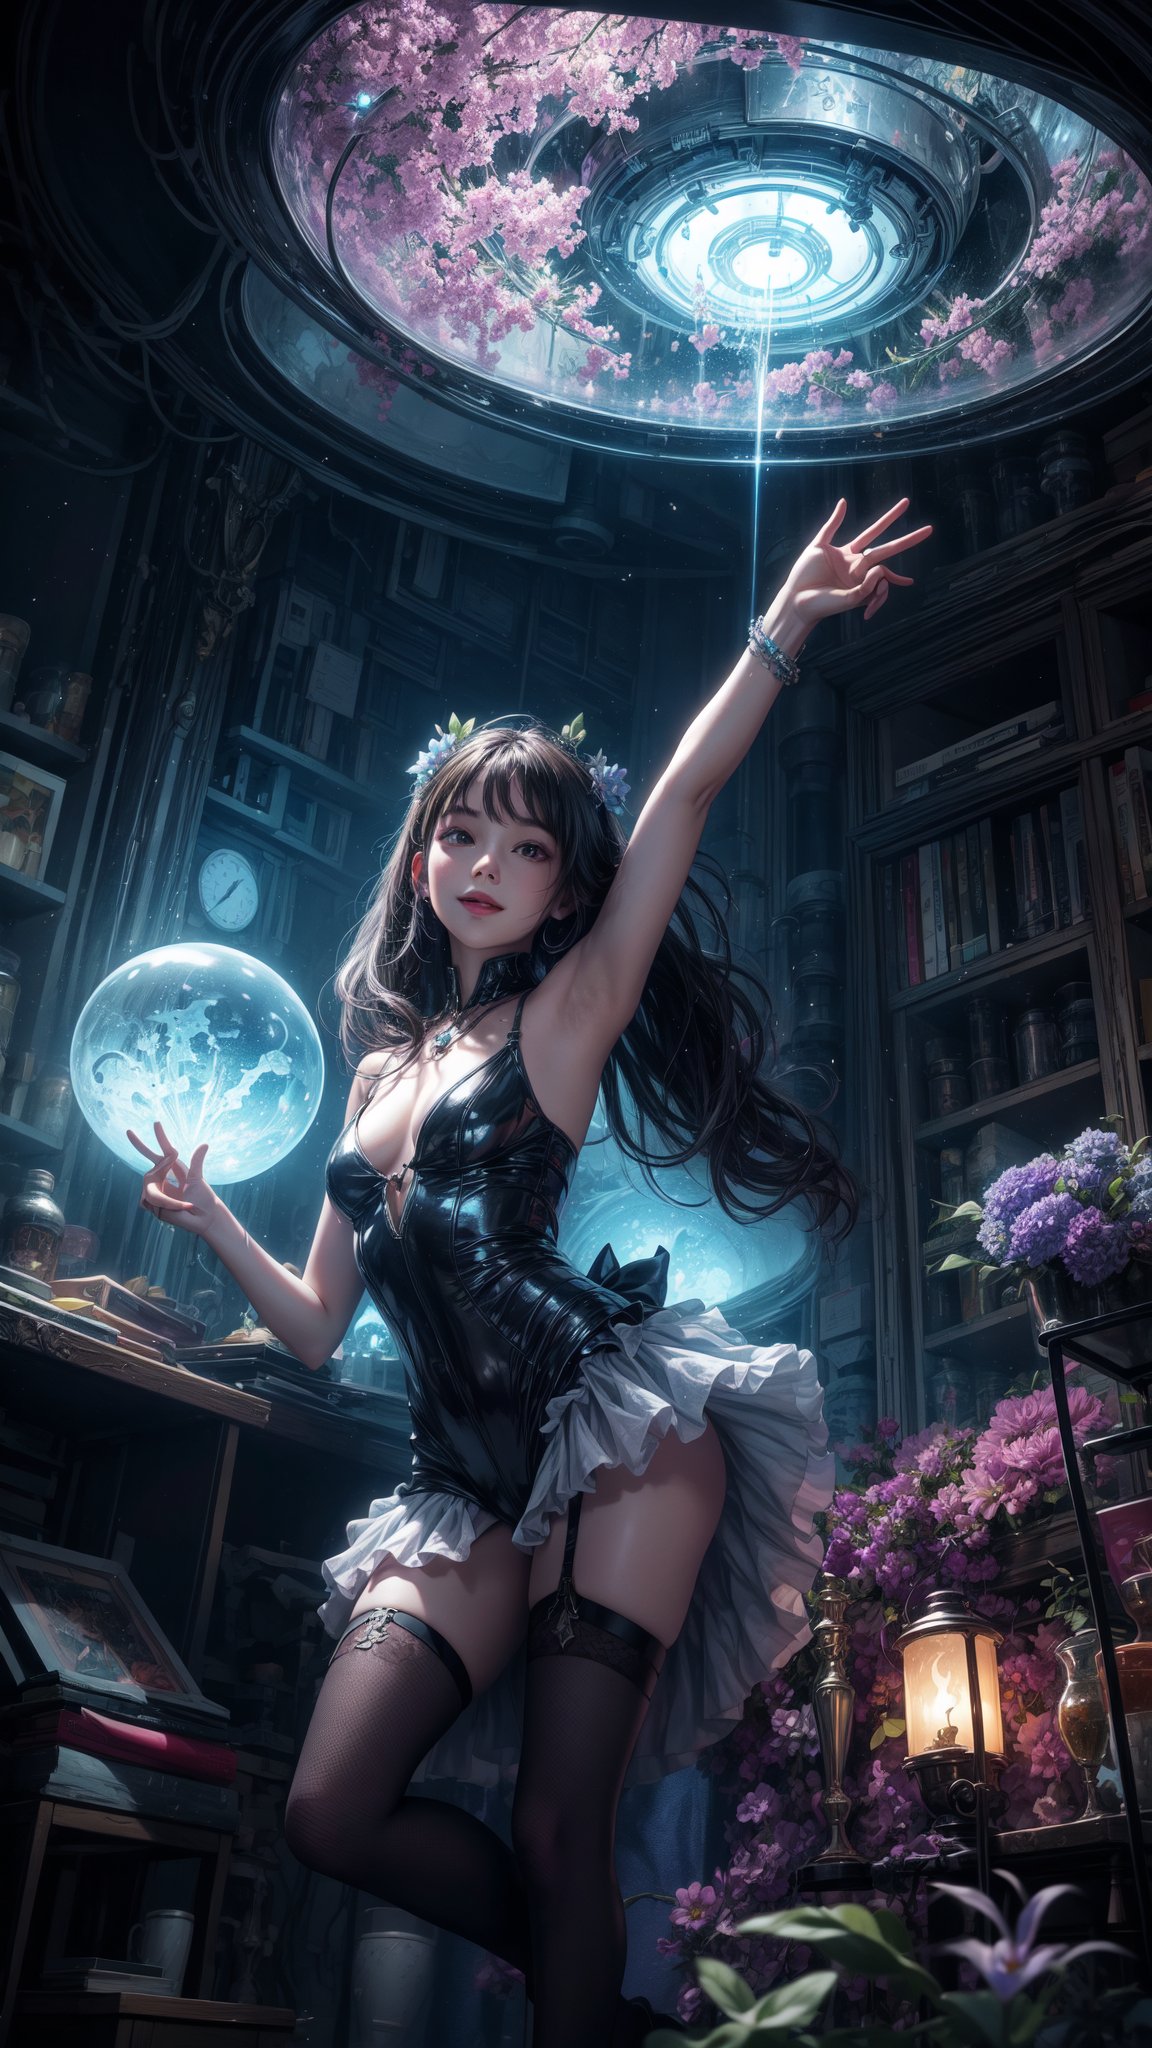 A curious girl with a bouquet of vibrant flowers stands amidst a fantastical landscape inspired by Wonderland's whimsy. In the background, a glowing alien cityscape stretches towards the sky, illuminated by an ethereal blue light. The girl's bright smile and outstretched arms seem to welcome the extraterrestrial visitors, as if showcasing her own little patch of wonder in this surreal science fiction world.